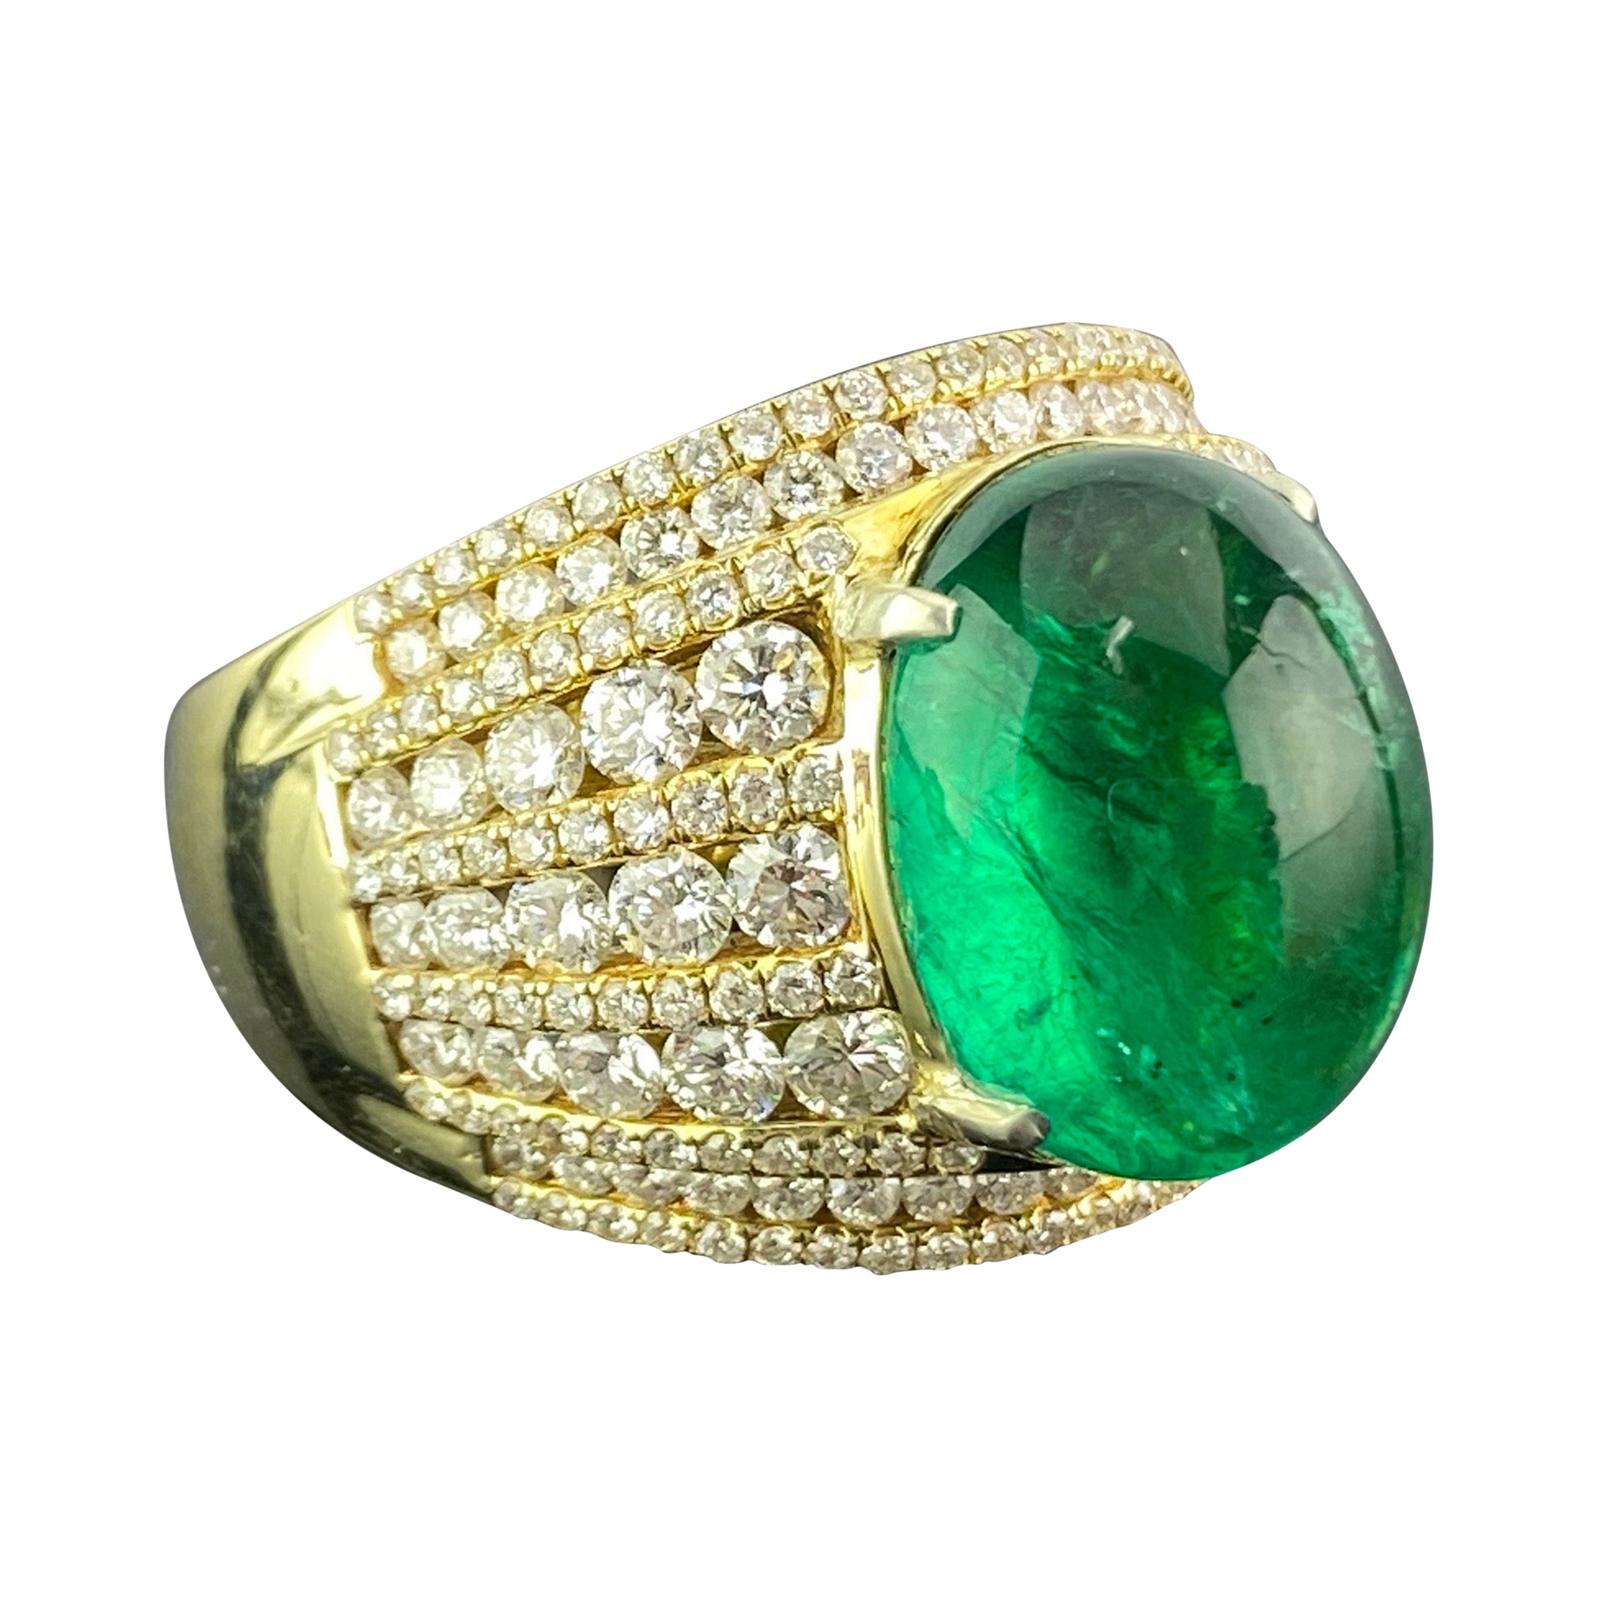 10.66 Carat Emerald Cabochon and Diamond Dome, Cocktail Ring